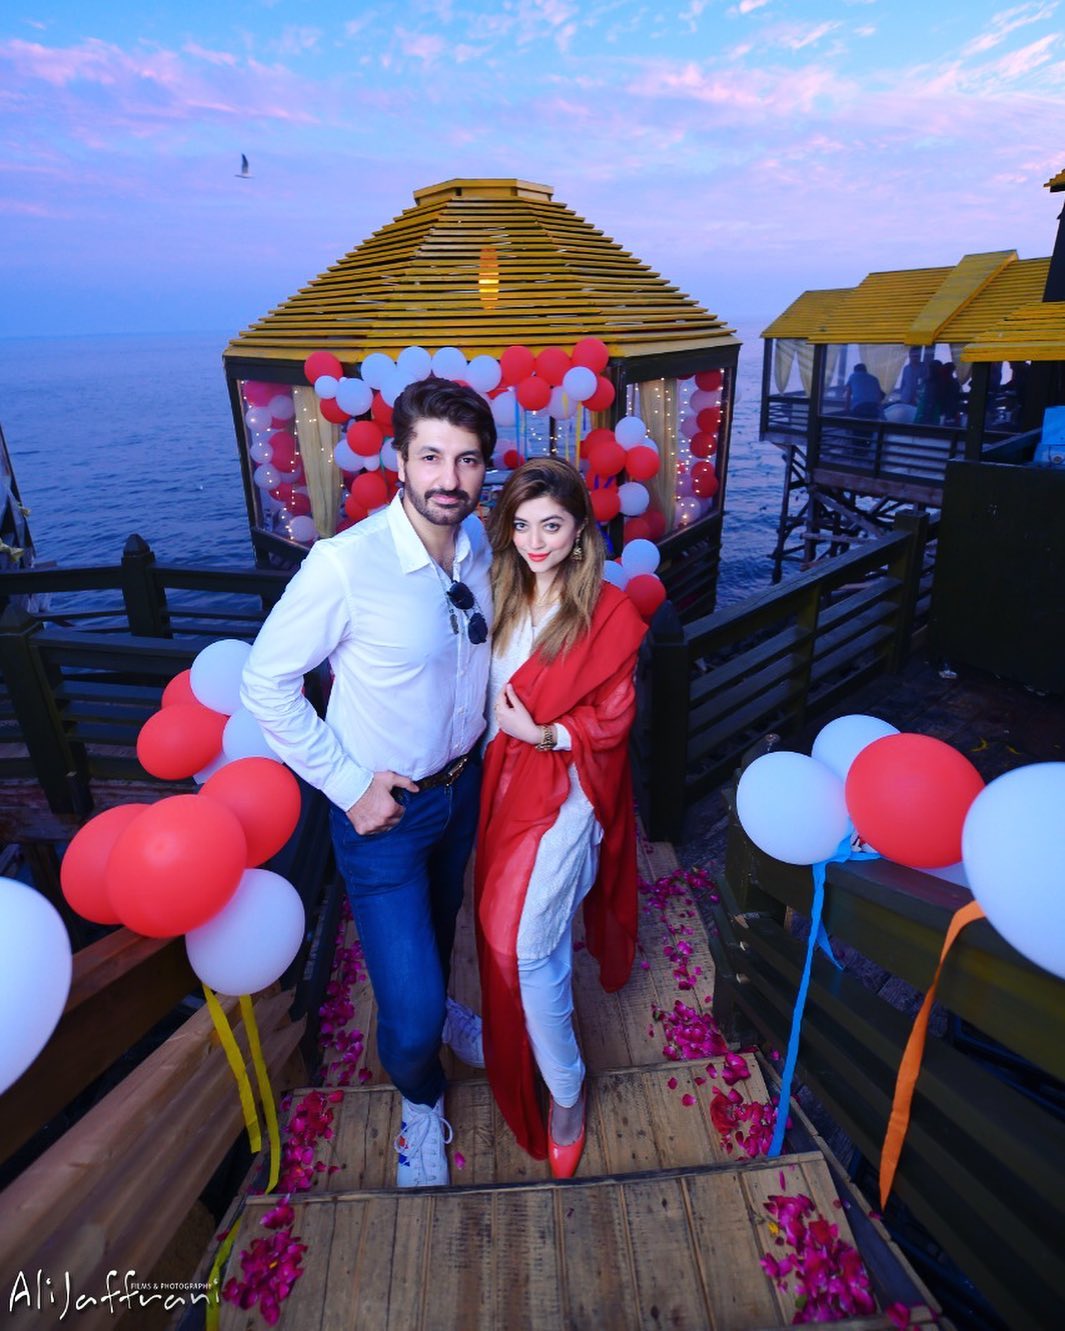 Syed Jibran Throws Surprise Birthday Party for His Wife Afifa Jibran